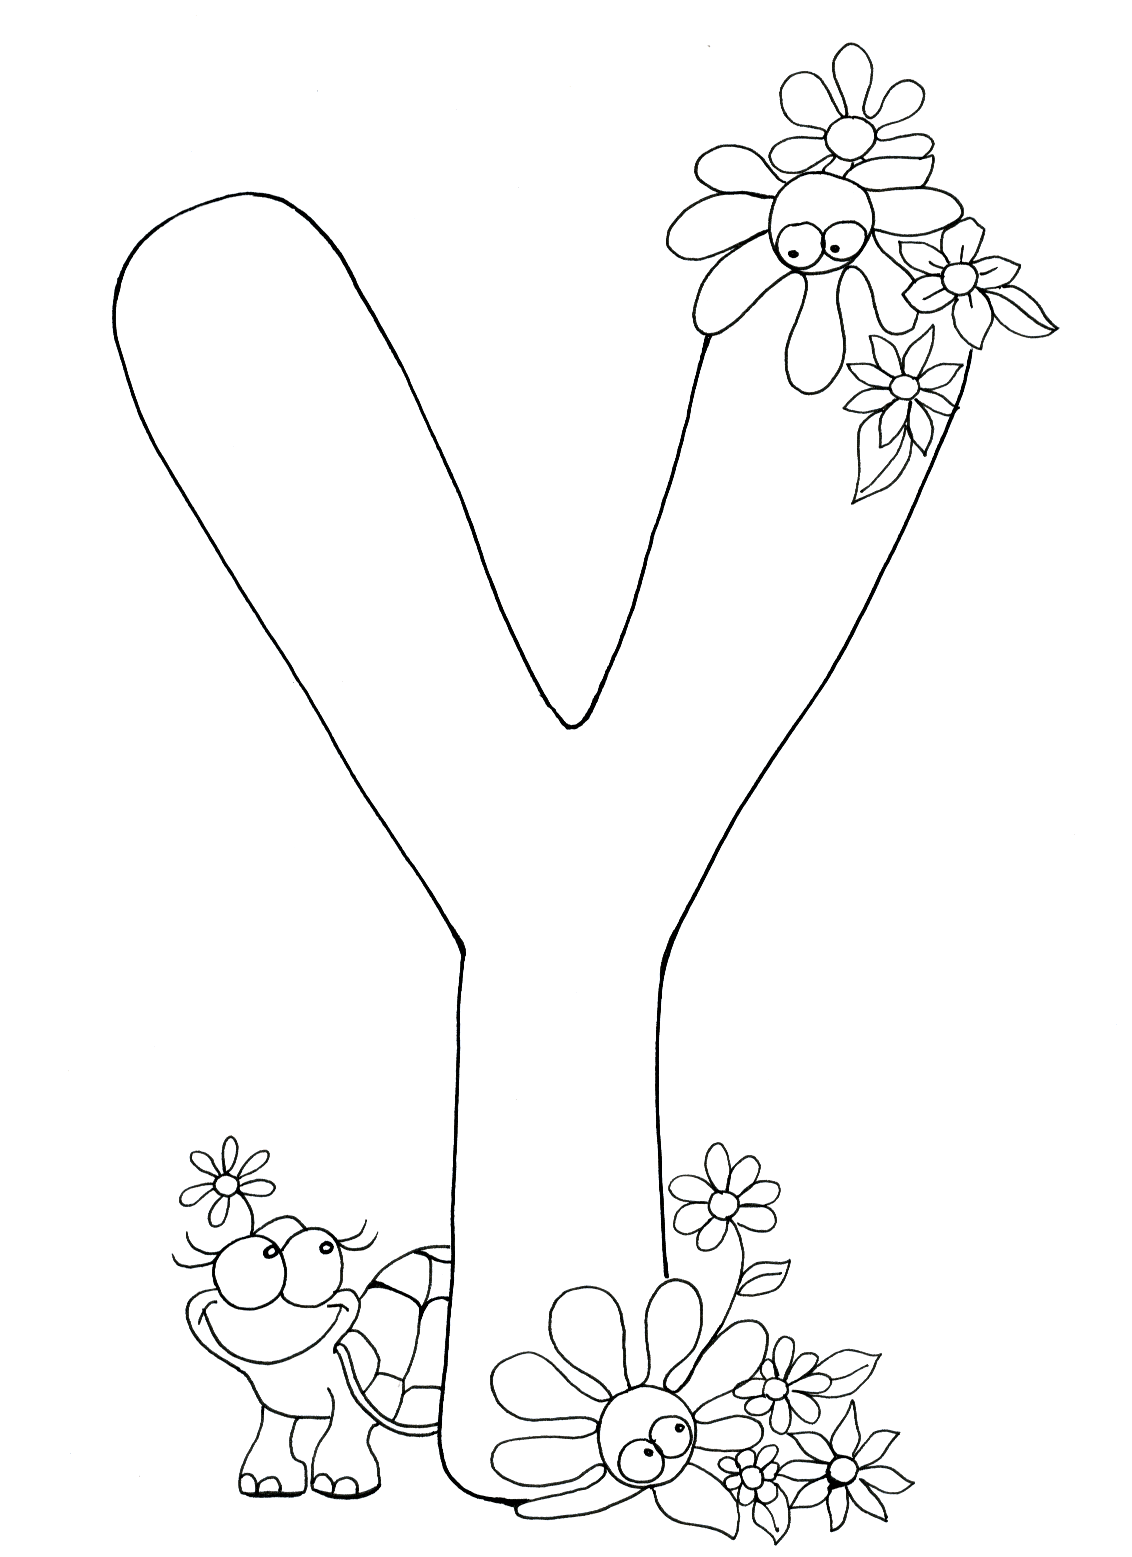 The Letter Y Coloring Pages - Coloring Home